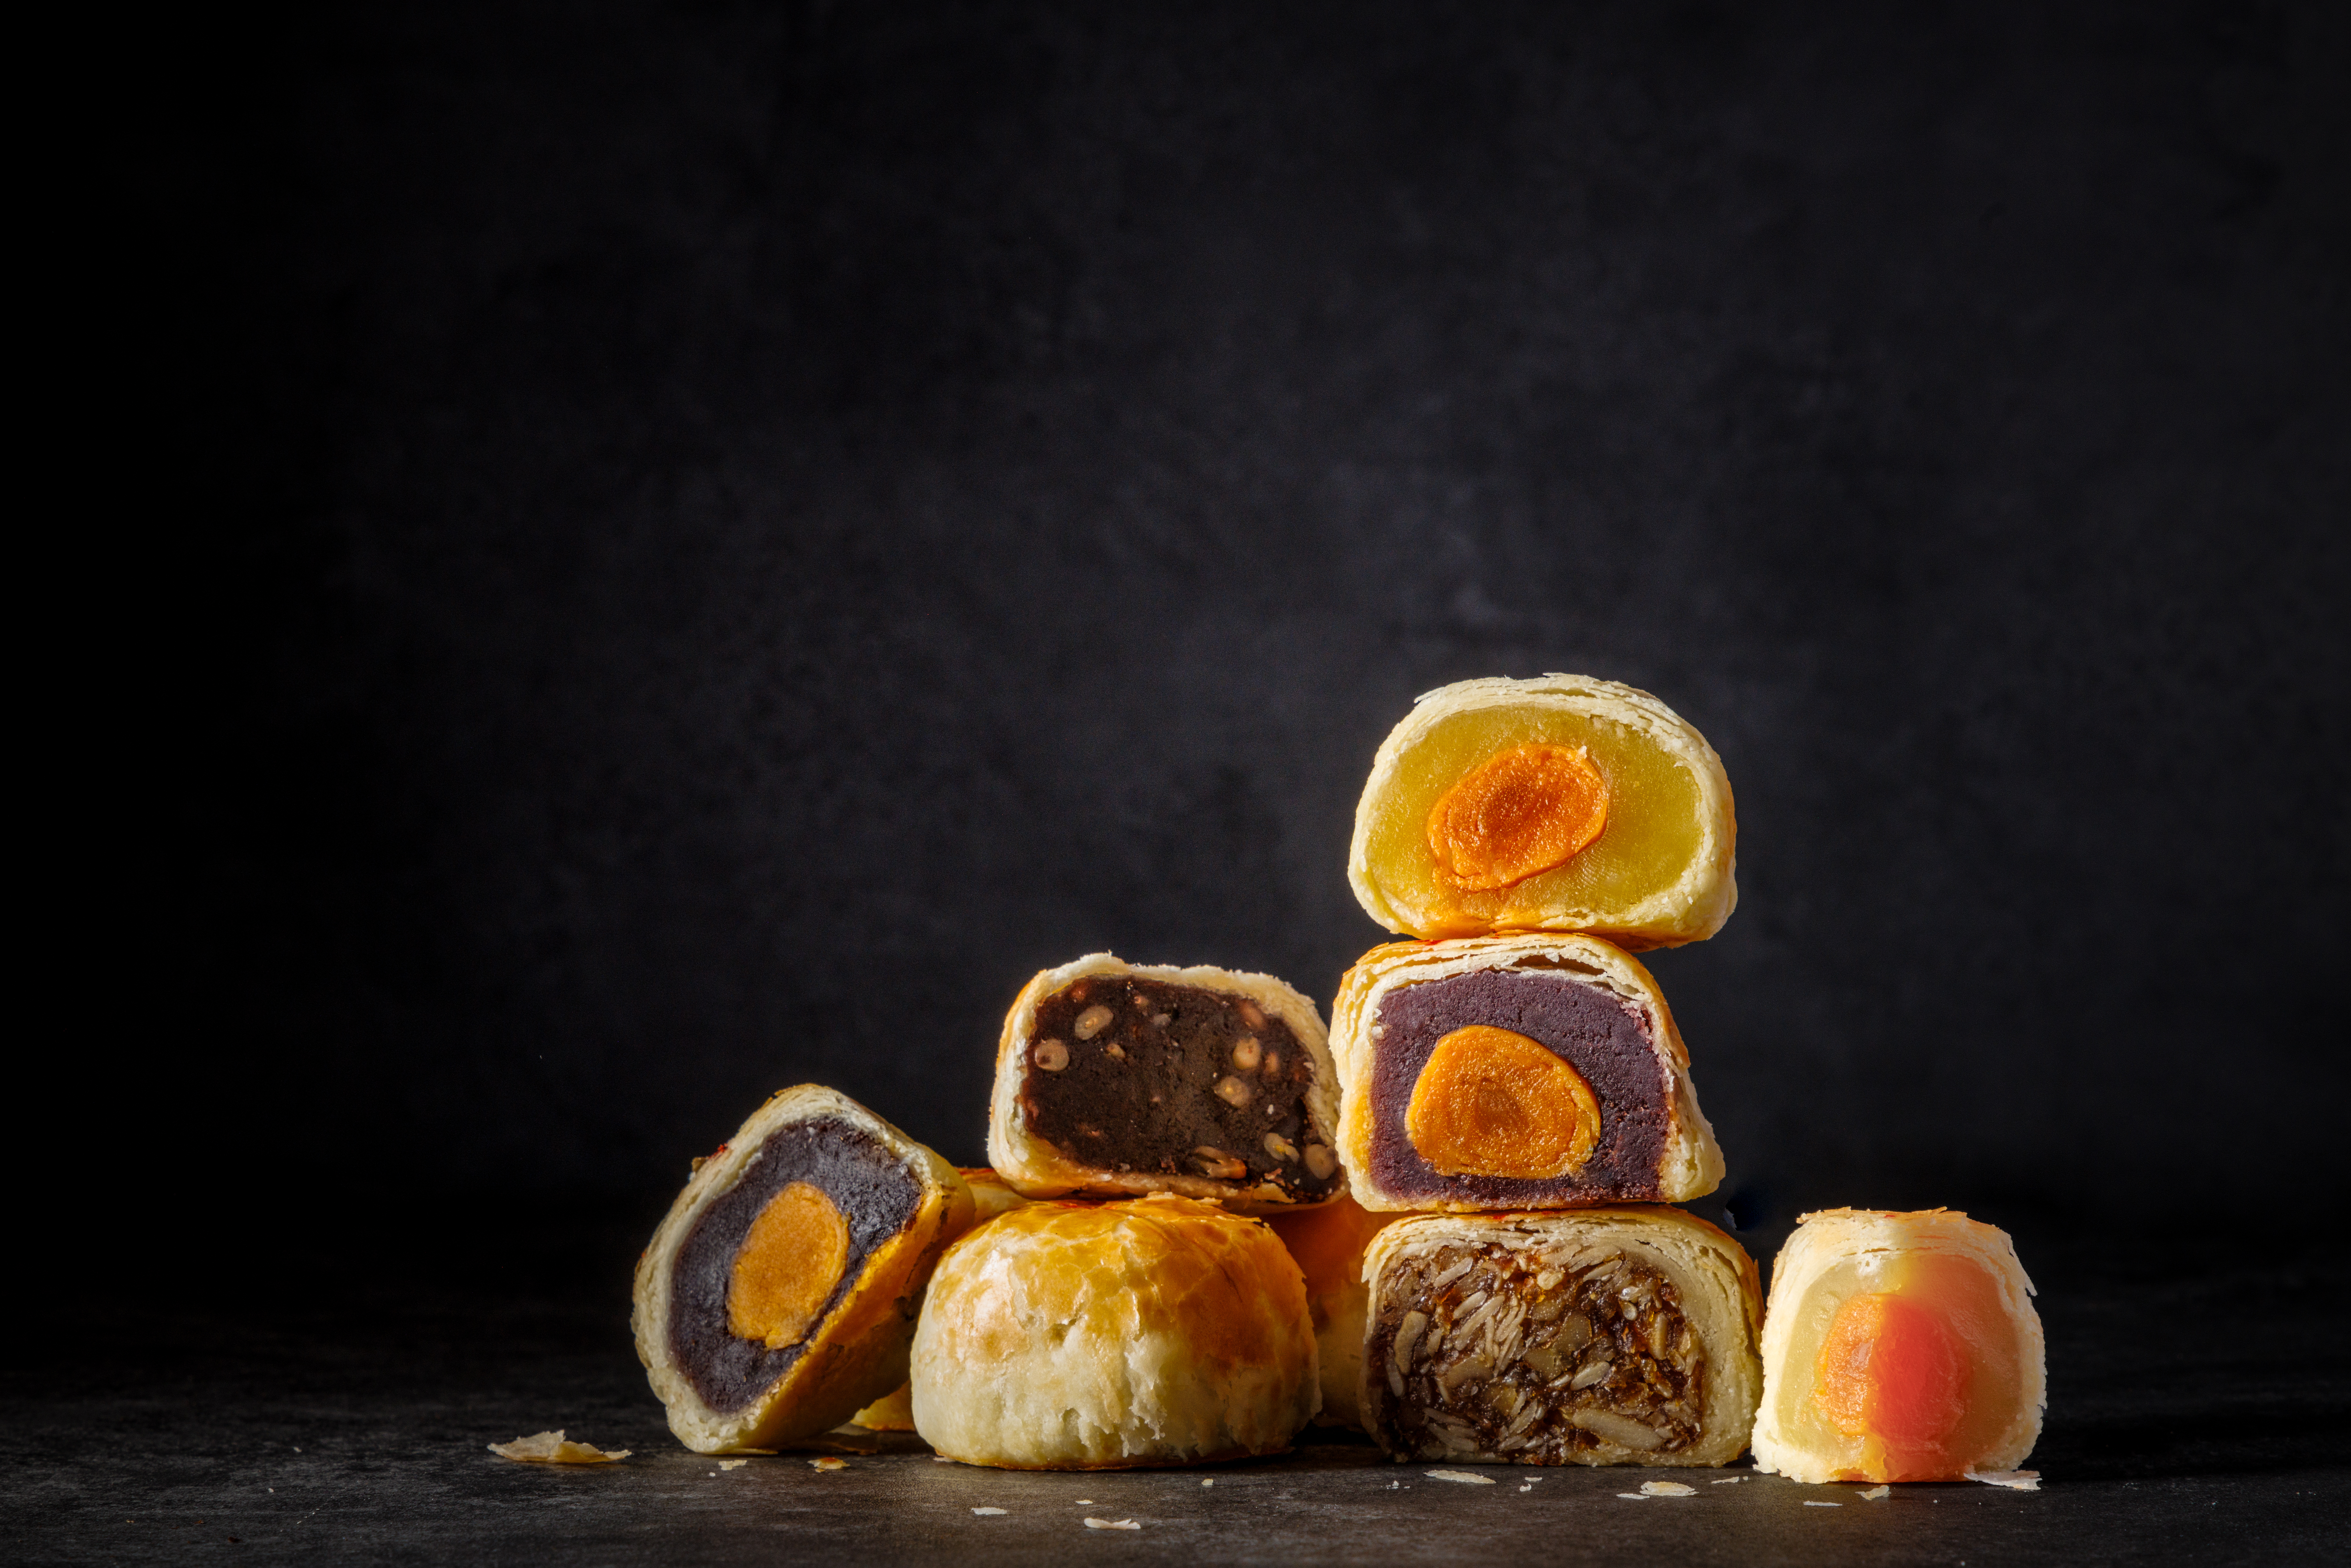 Six different mooncakes cut in half to reveal their fillings sit in a pile on a dark table with a dark background. There is one half of a mooncake at the bottom that shows only the pastry half.